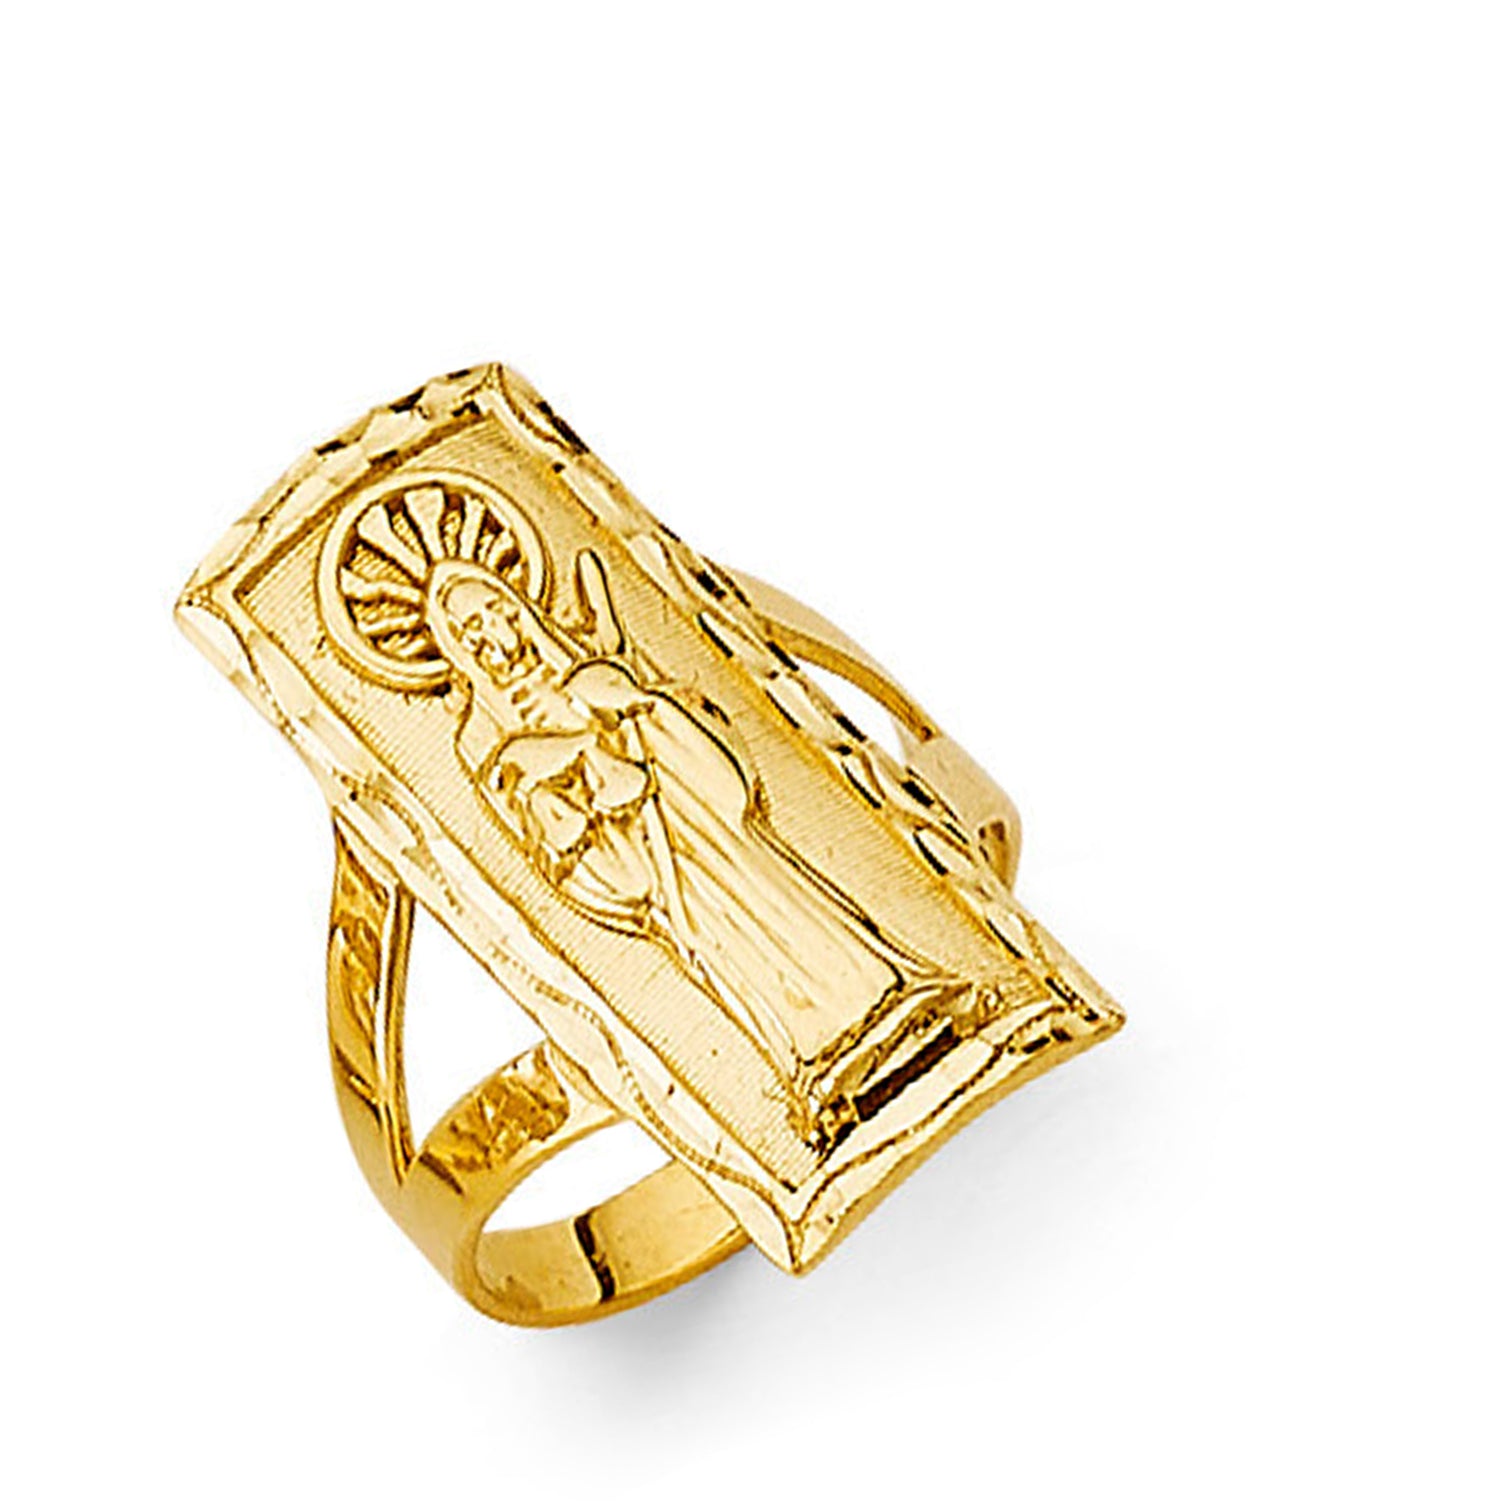 Sab Muerte Casting Ring in Solid Gold 